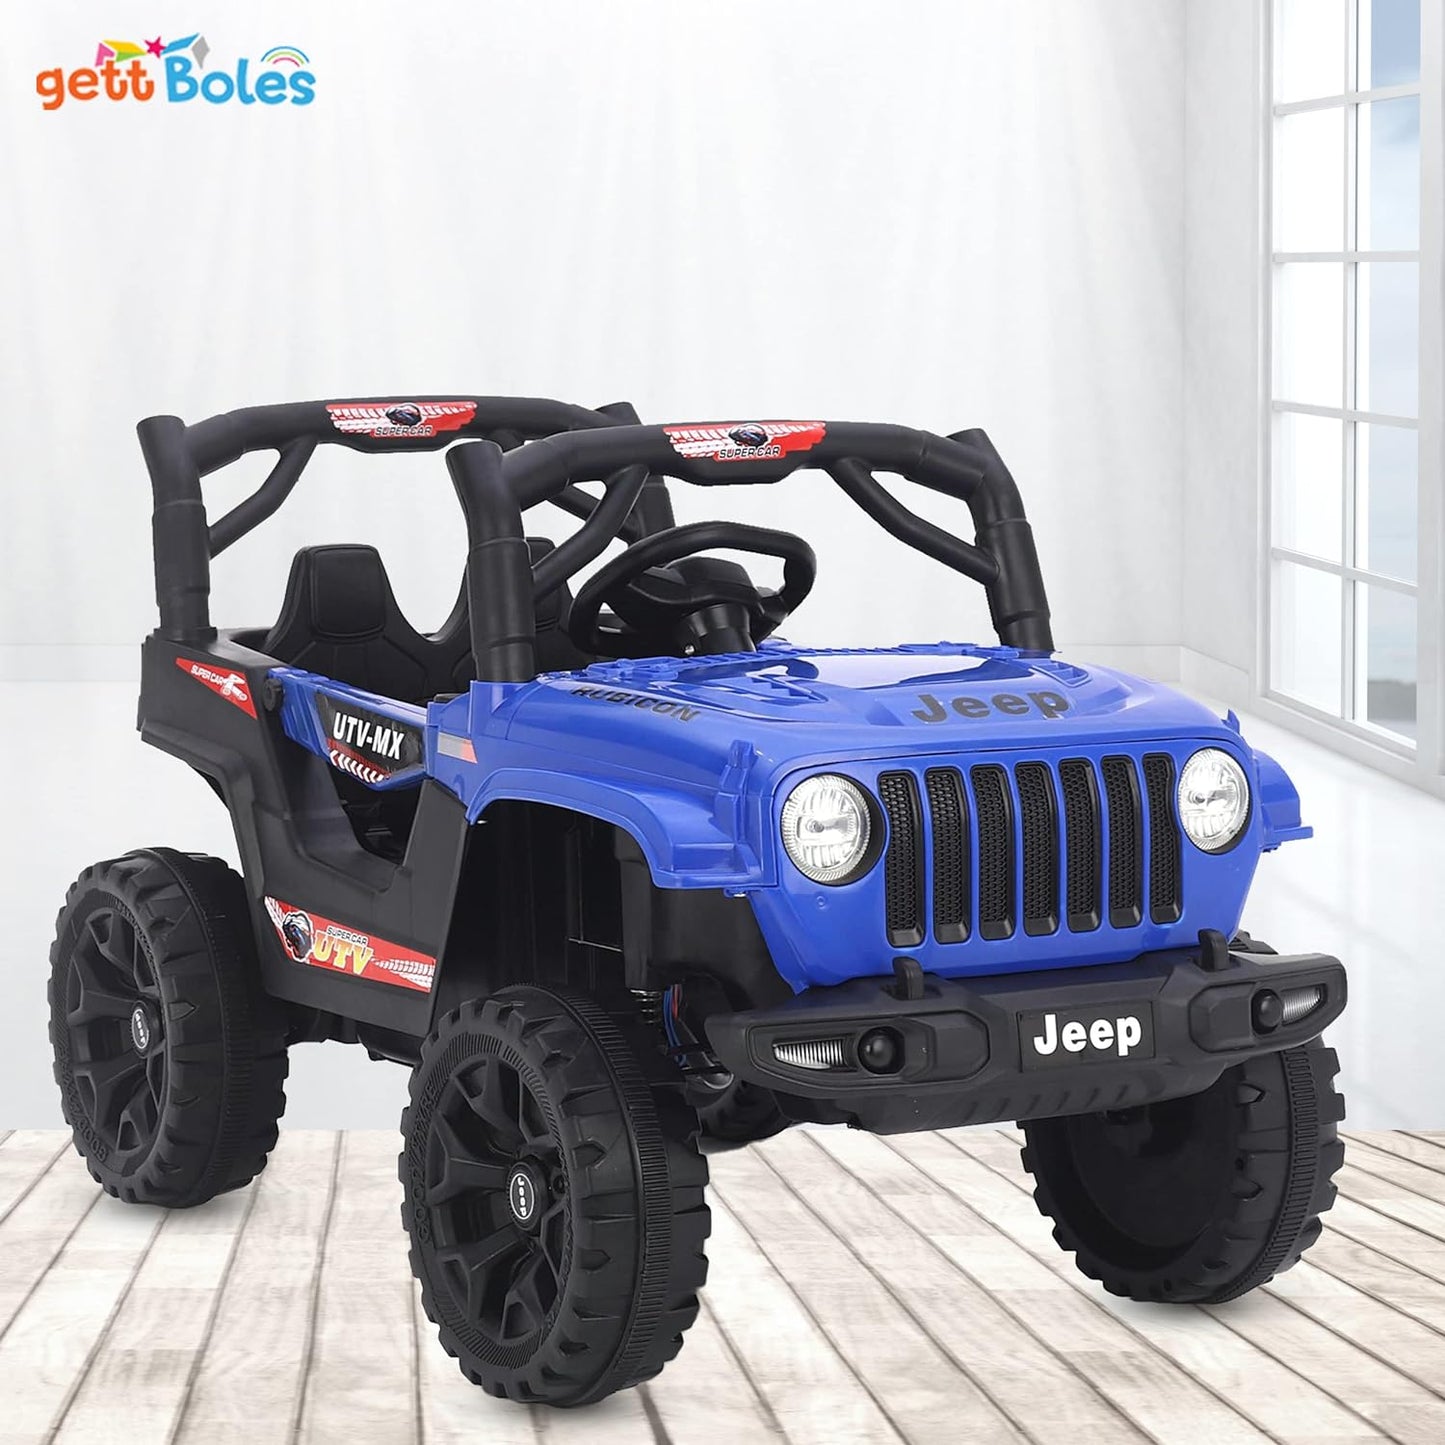 GettBoles 908 Electric Ride on Jeep for Kids with Music, Led Lights, Swing, Bluetooth Remote and 12V Battery Operated Car for1 to 4 Years Children to Drive (Blue)